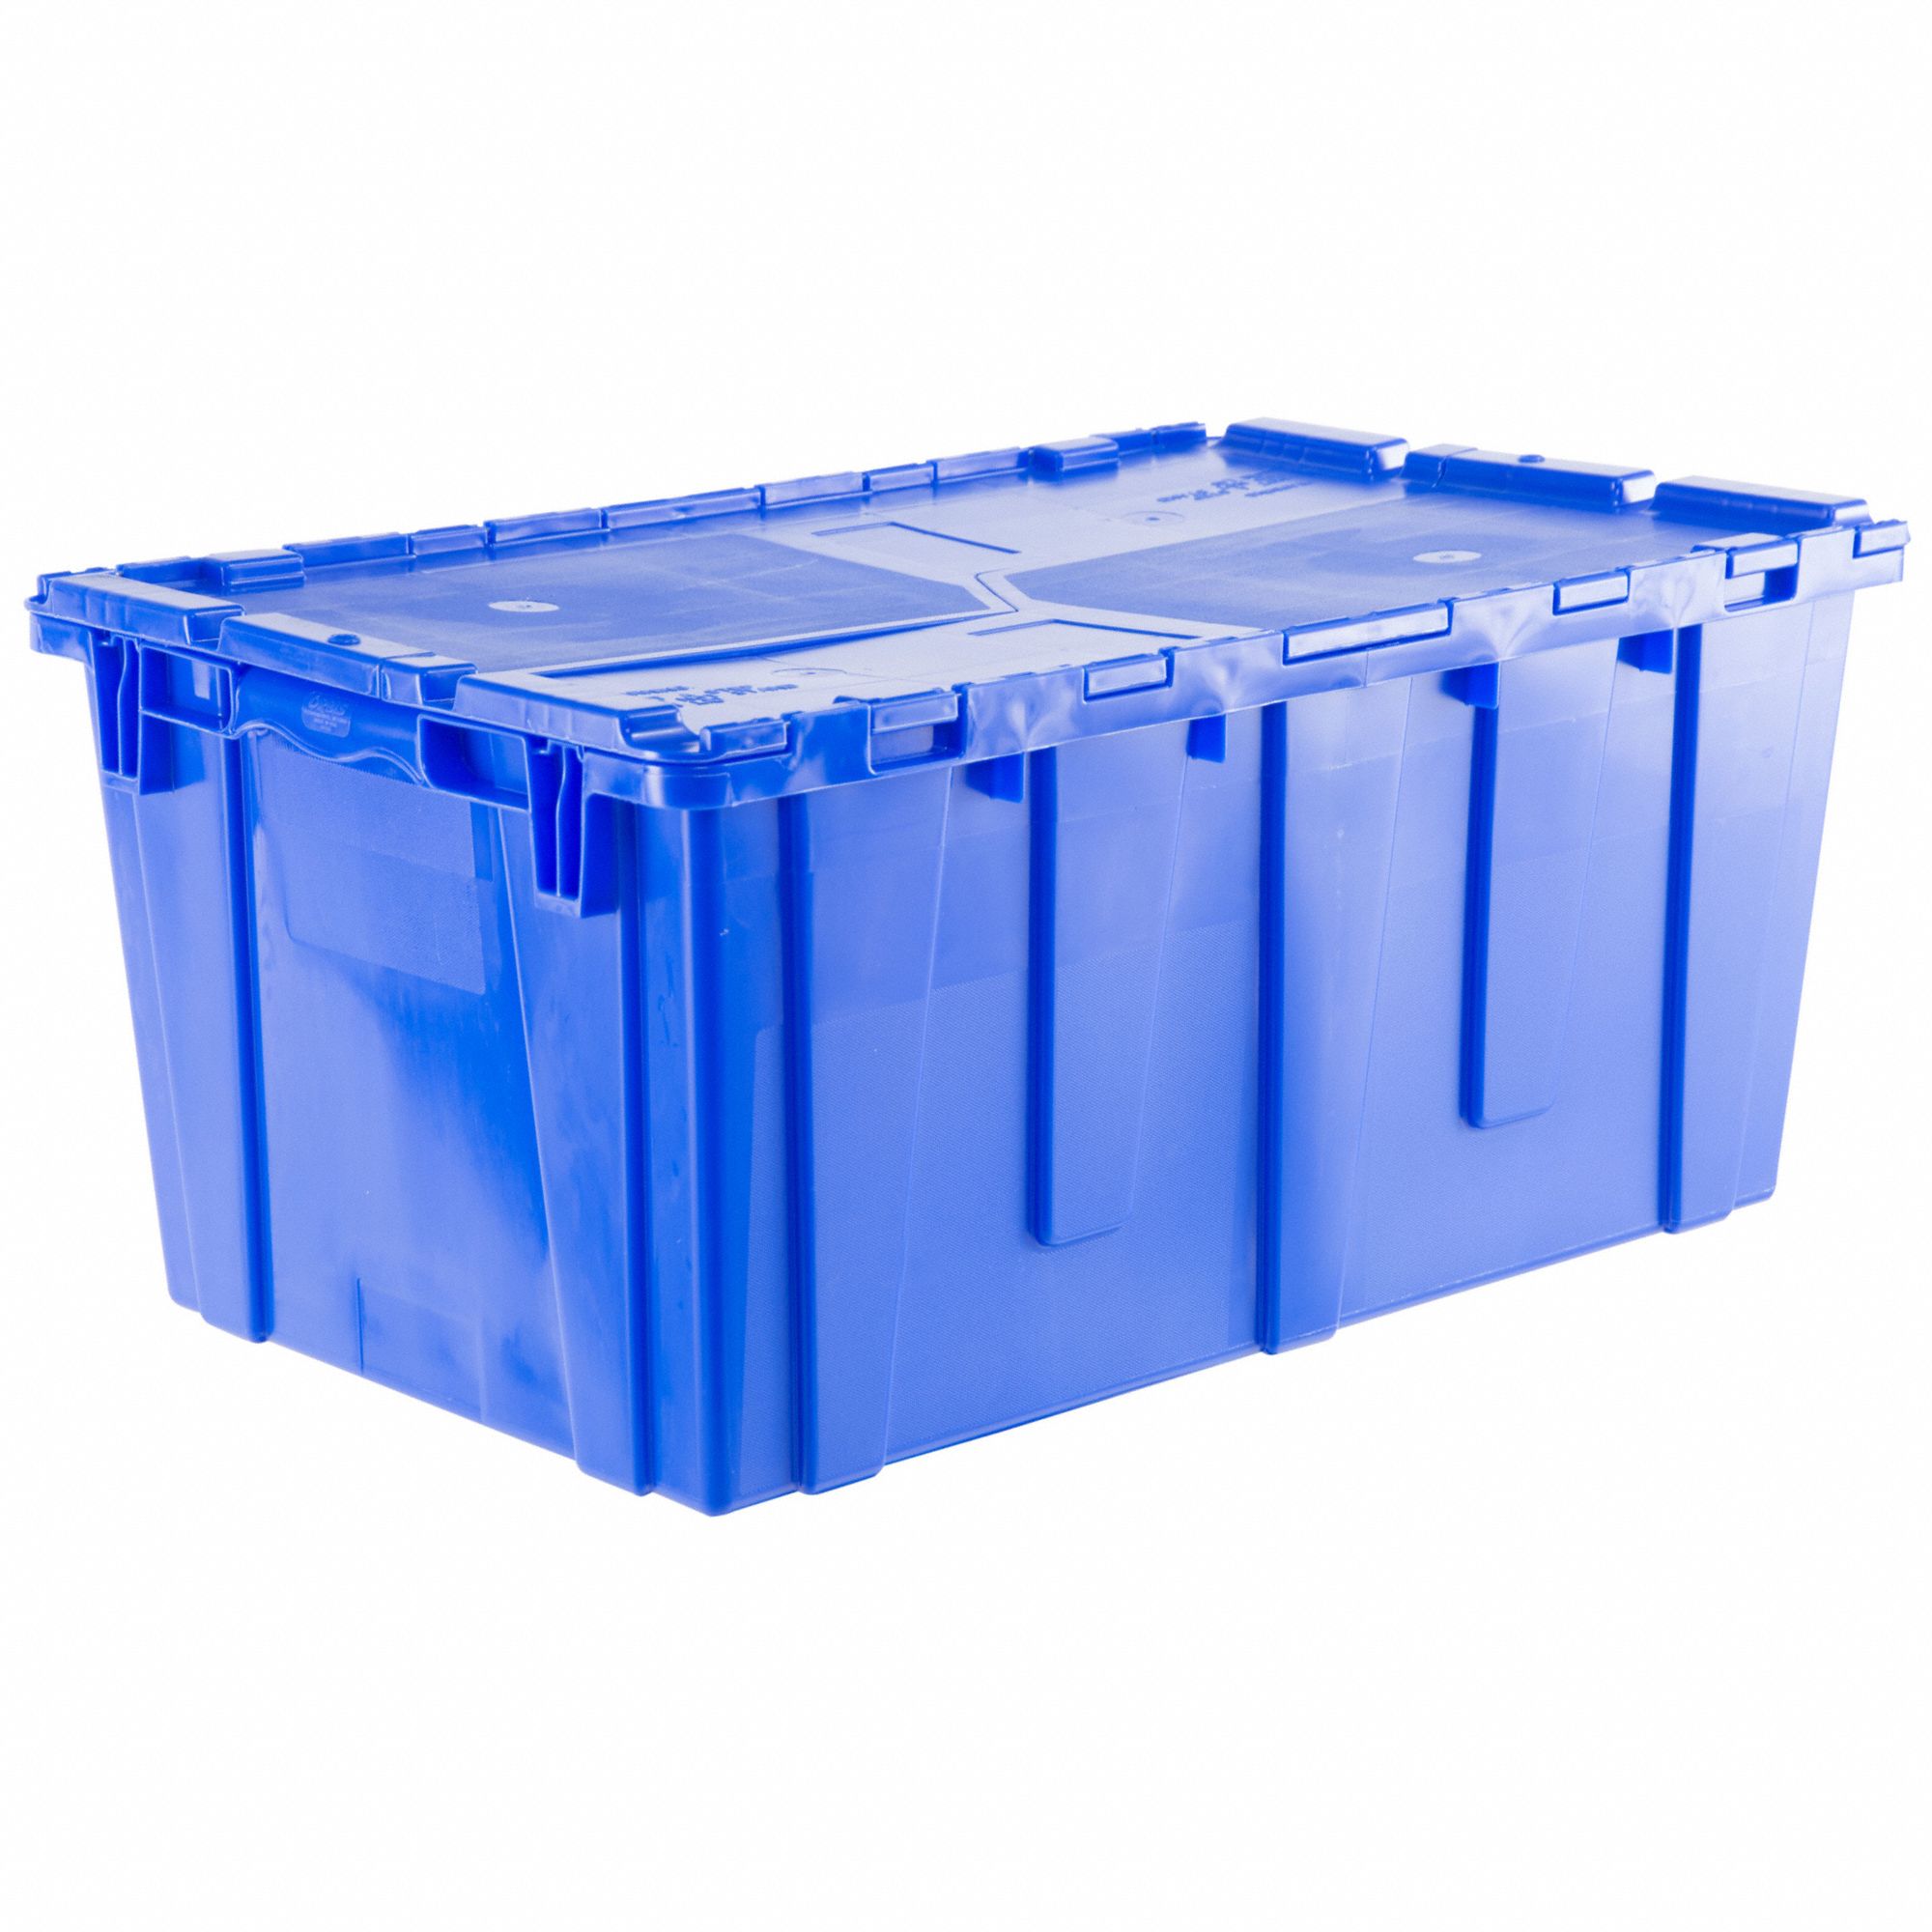 Orbis FP06 Clear Attached Lid Container, Clear, Solid, HDPE